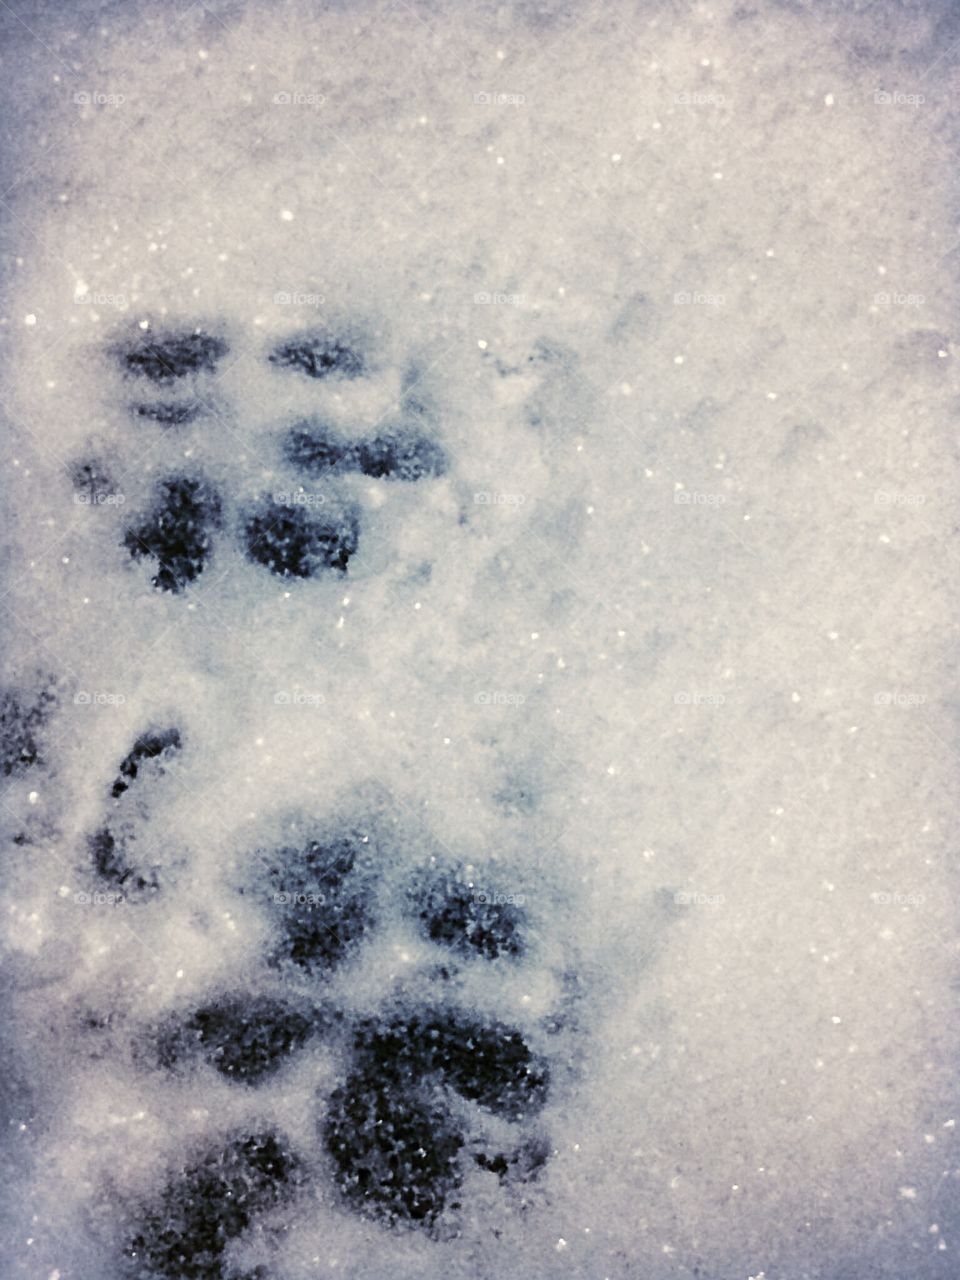 Dog paws in first snowfall 